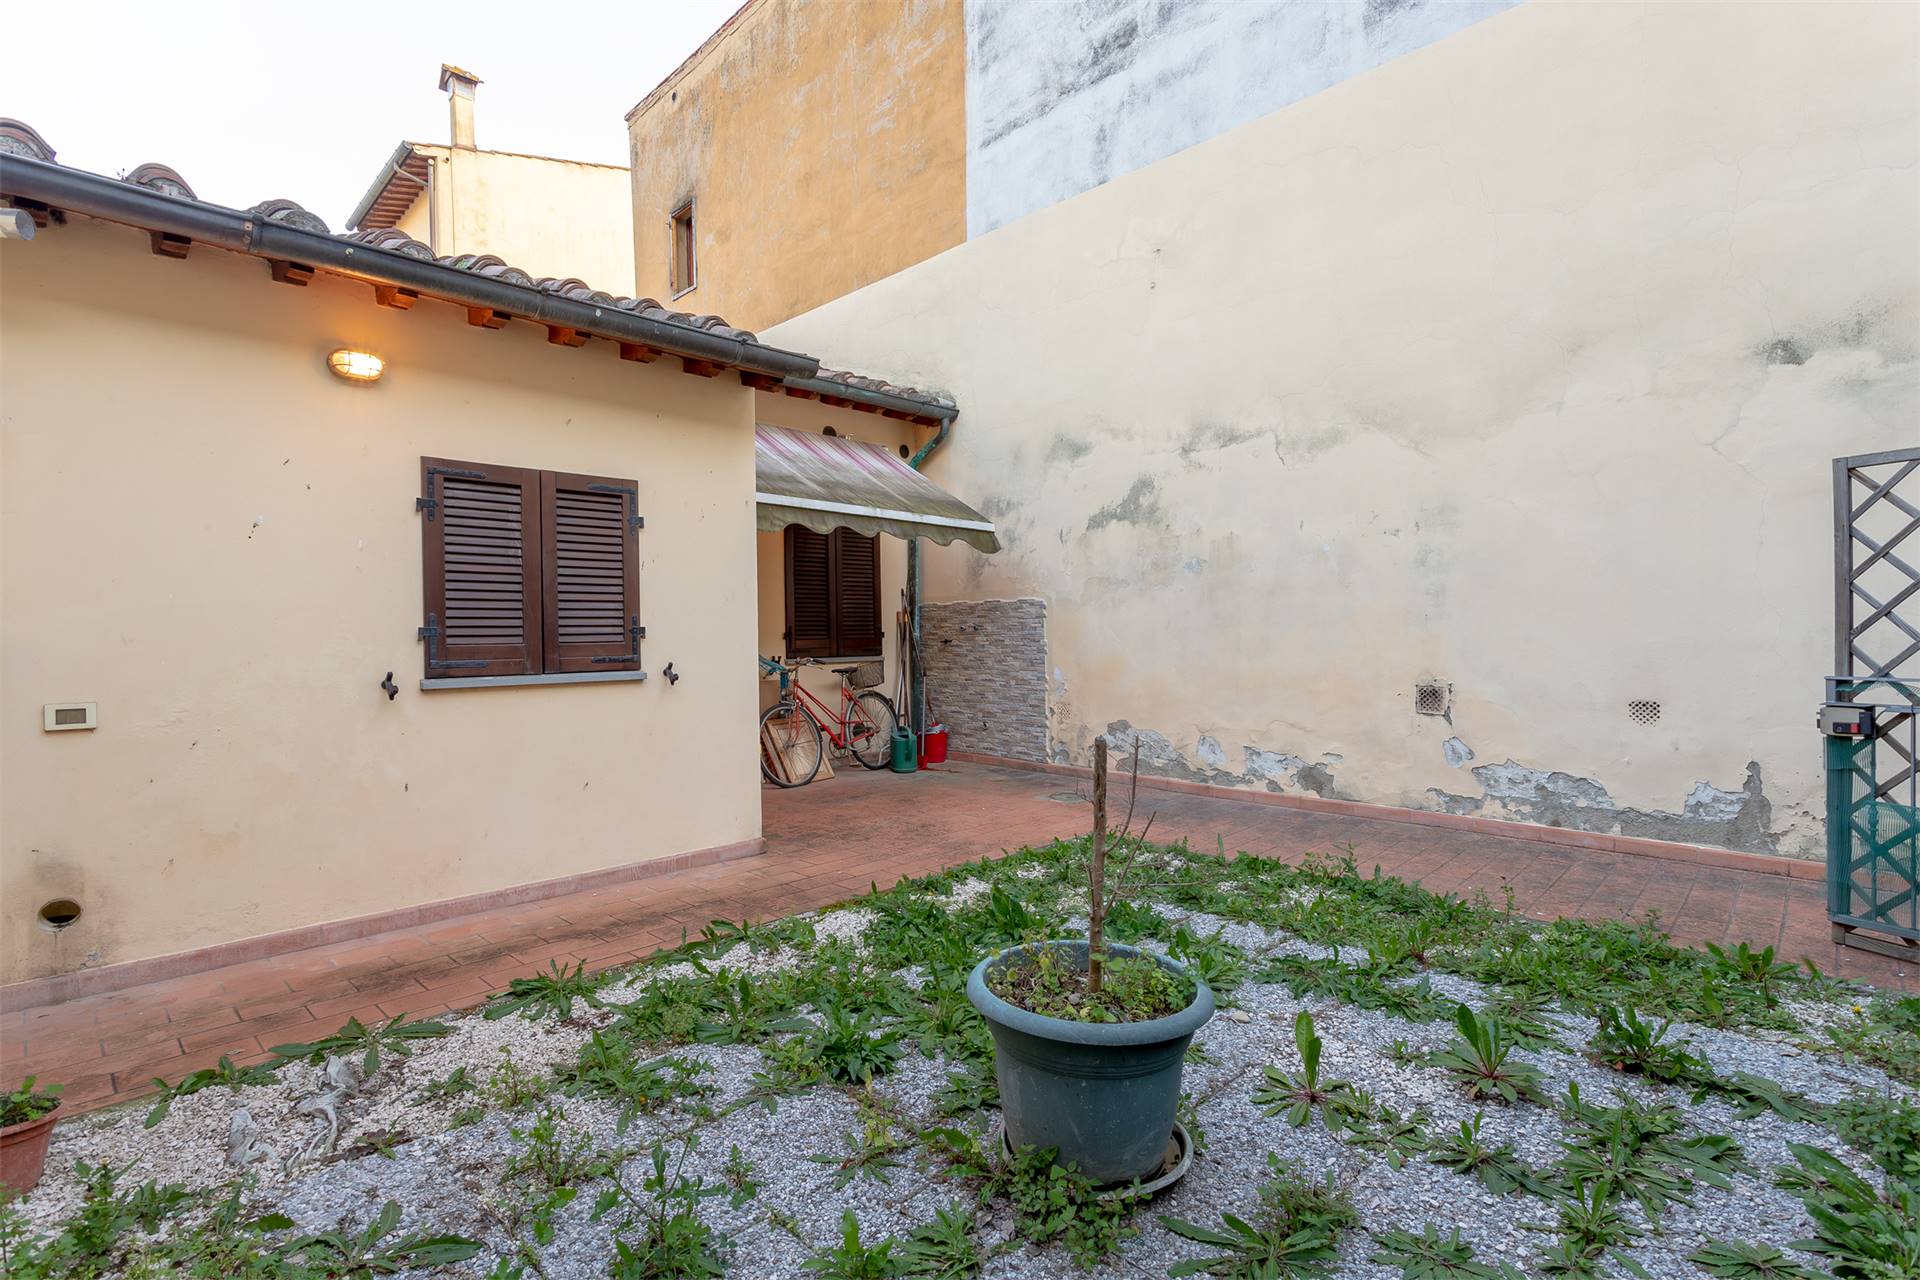 SANTA MARIA, CAMPI BISENZIO, Apartment for sale of 33 Sq. mt., Good condition, Heating Individual heating system, Energetic class: G, placed at 